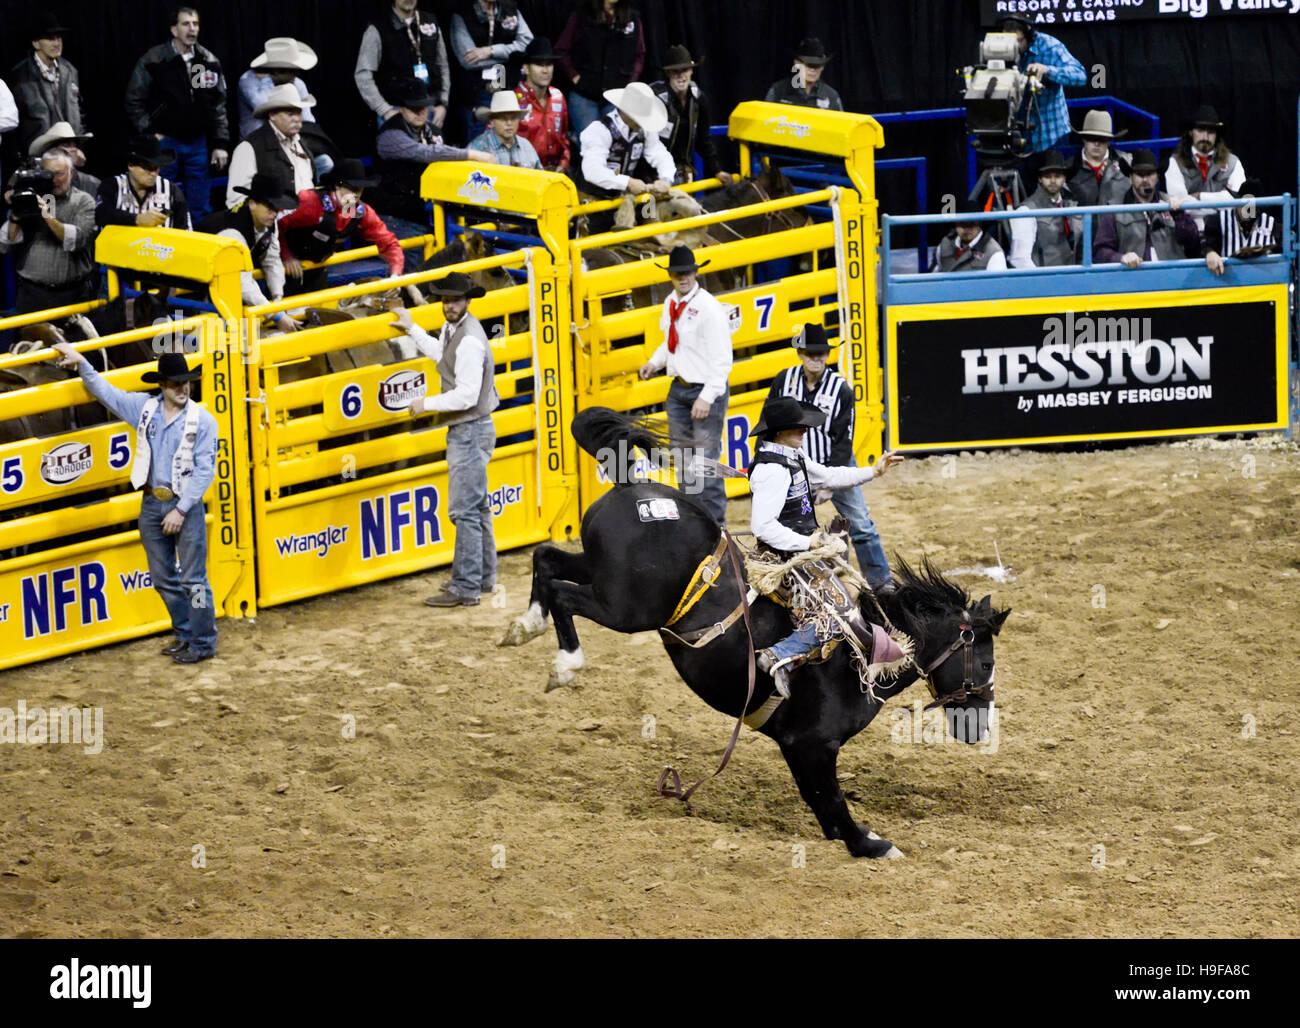 Las Vegas Nevada, December 2015 - Bronco riding at the National Rodeo Finals NFR Stock Photo